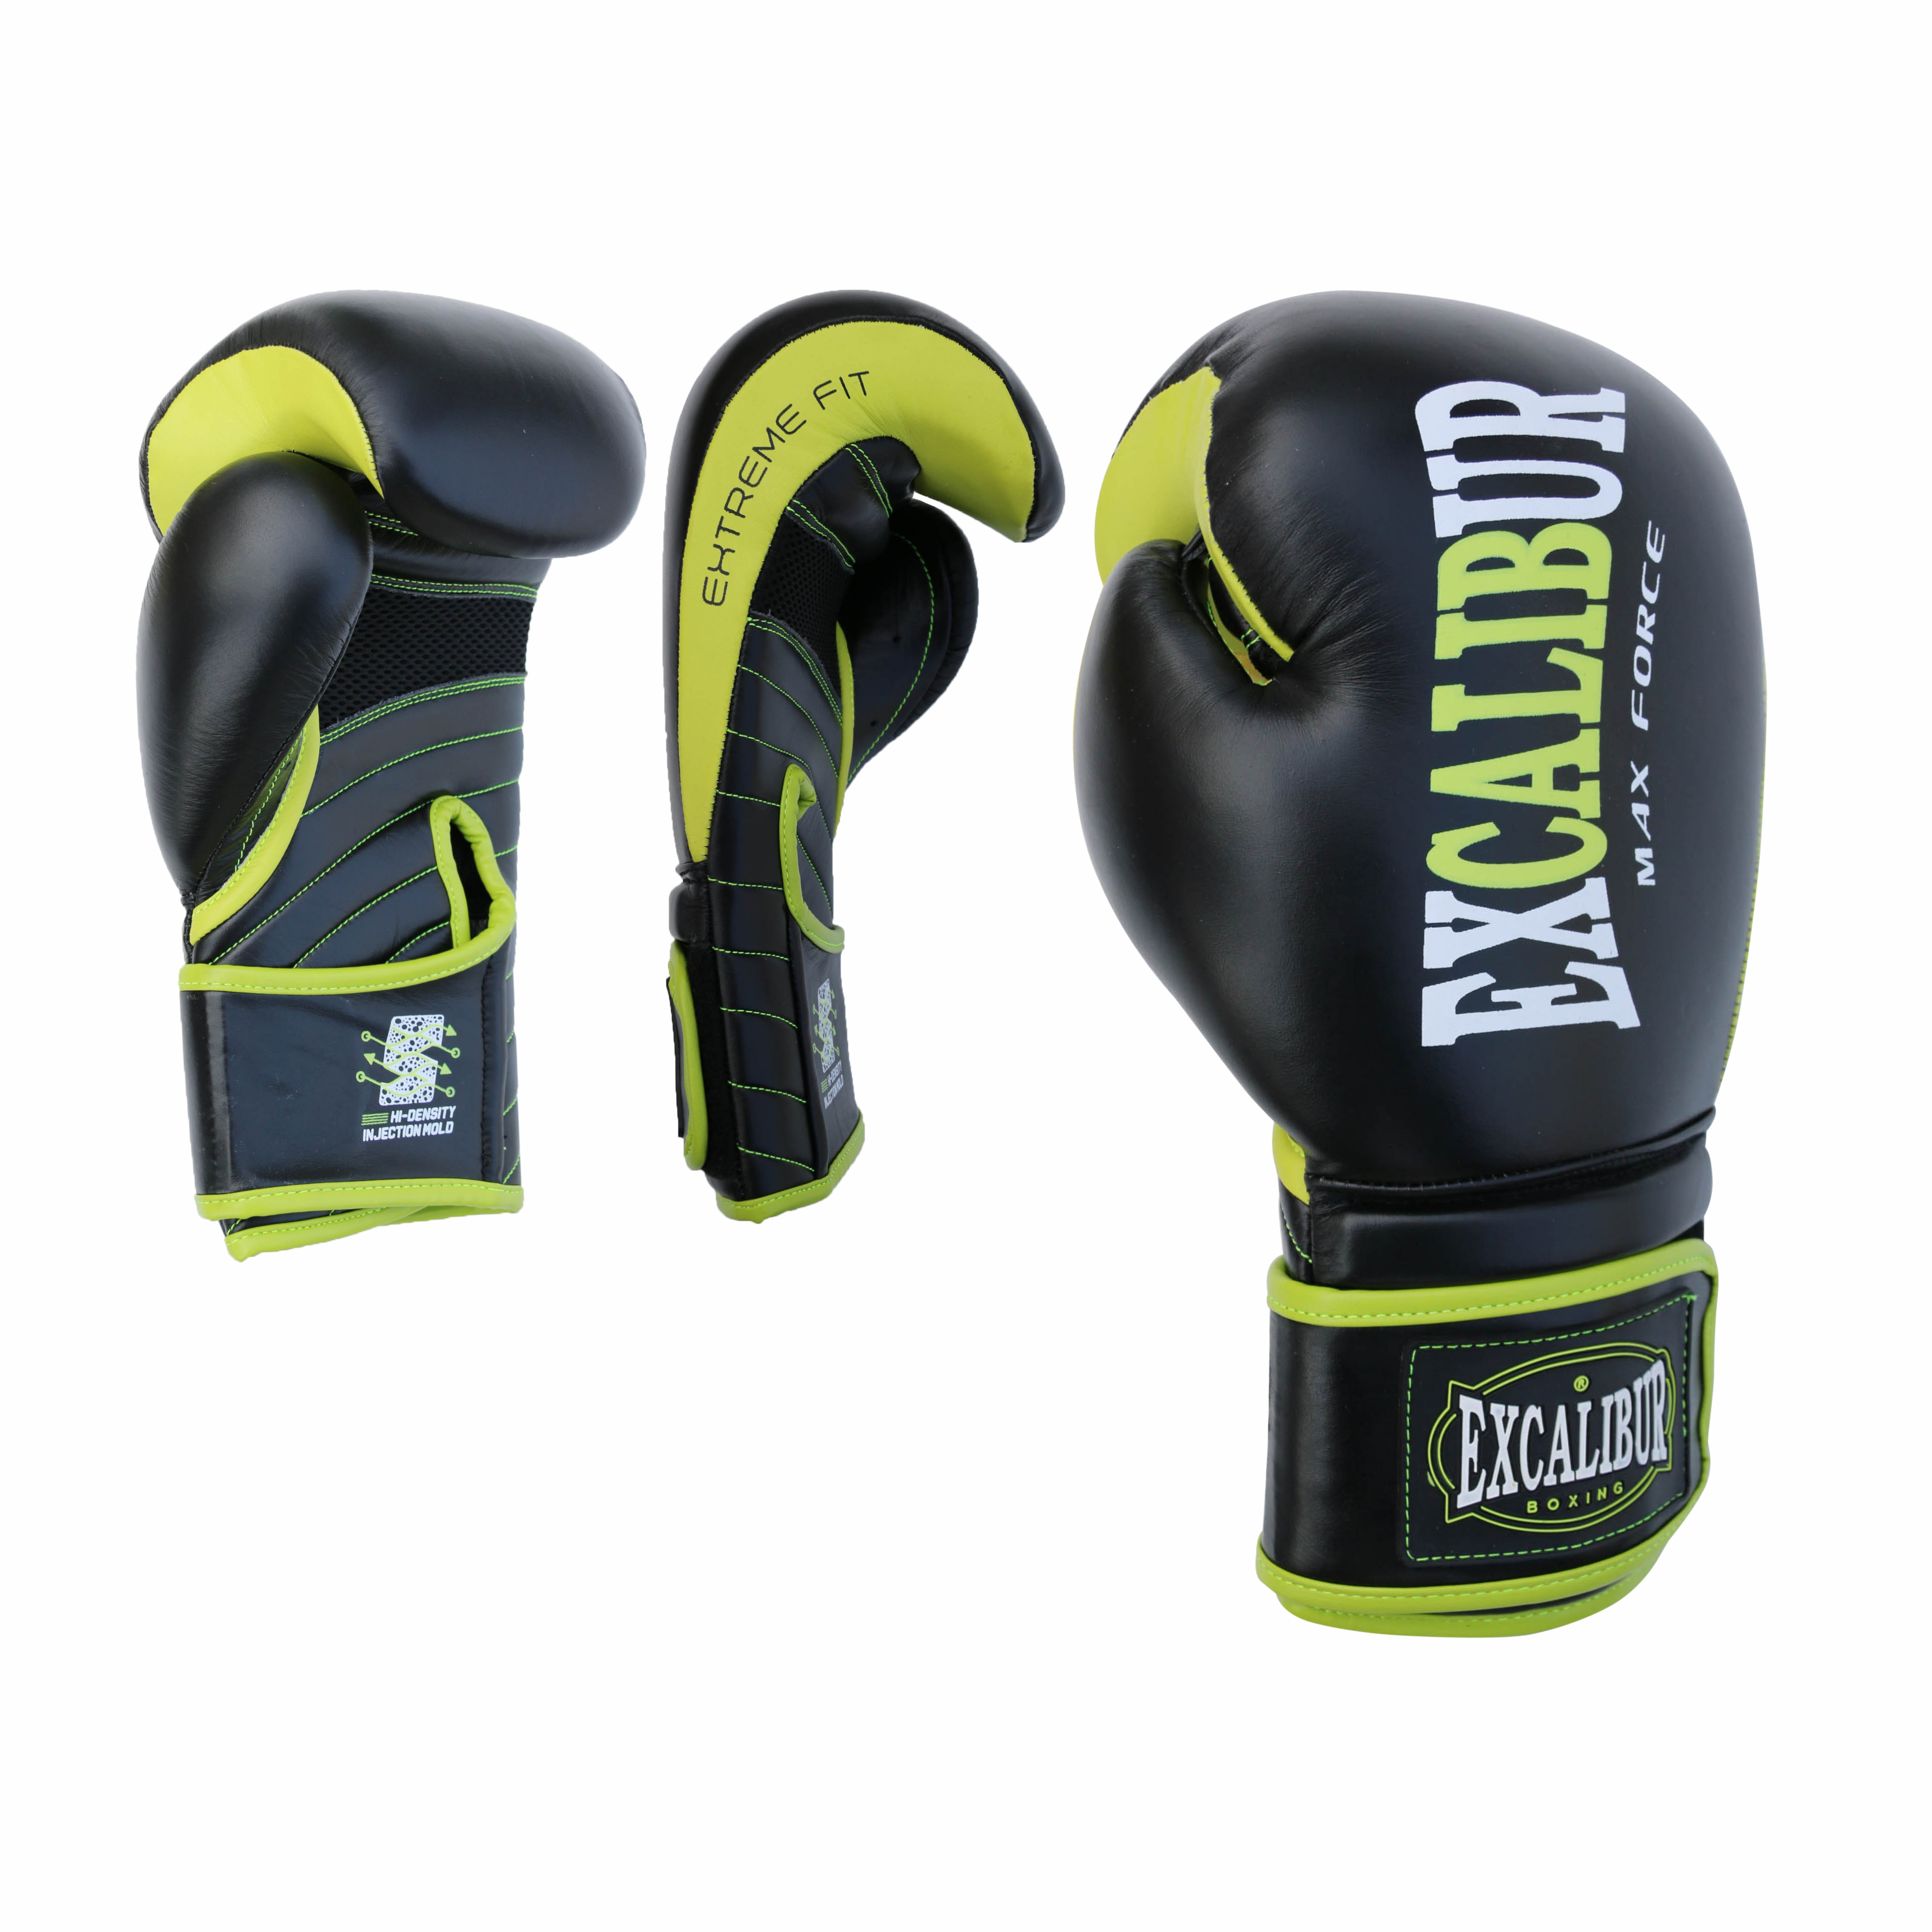 Max Force Boxing Gloves